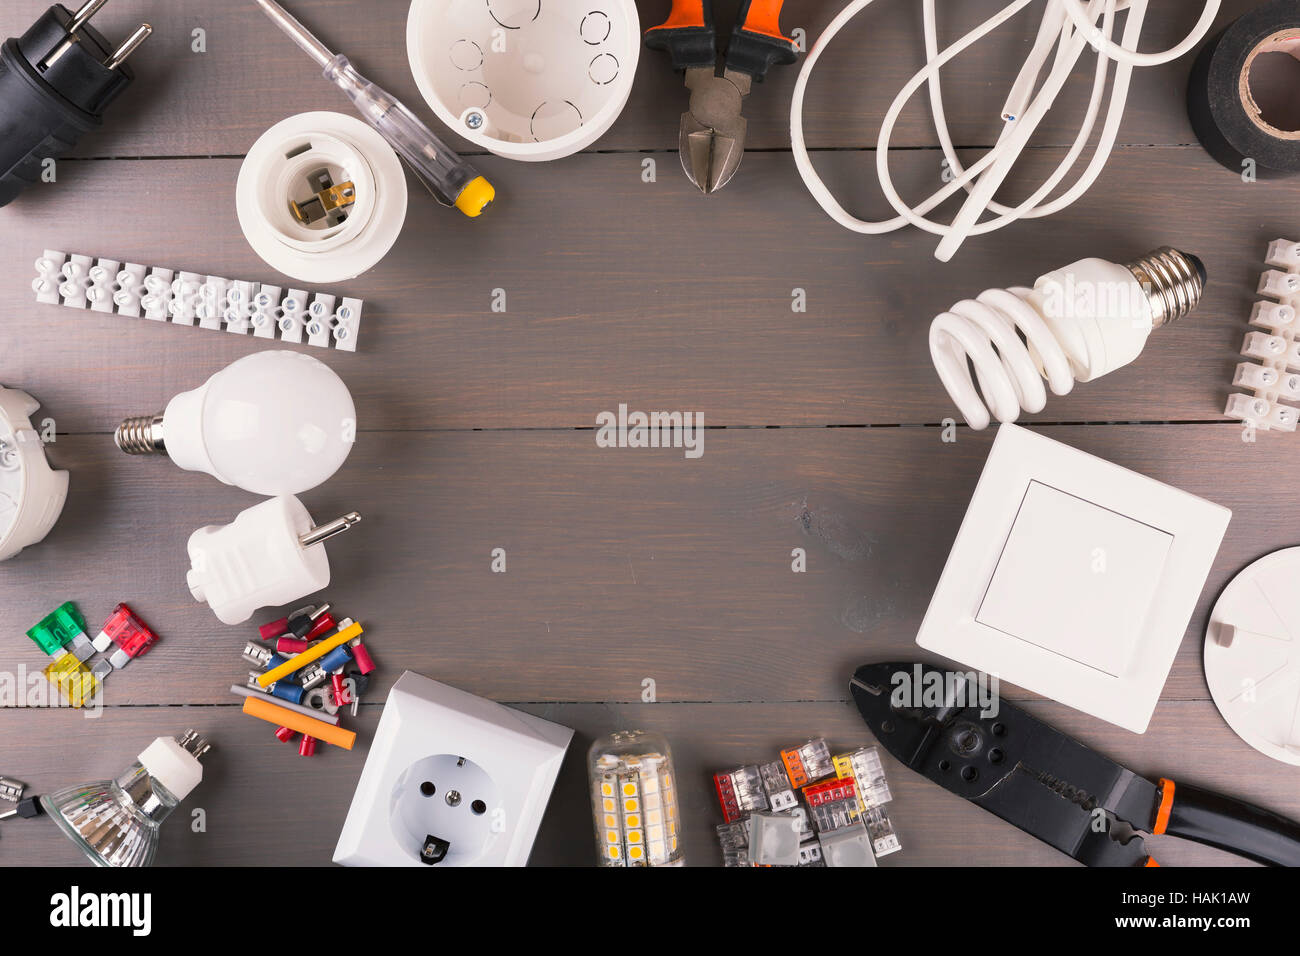 top view of electrical tools and equipment on wooden table Stock Photo